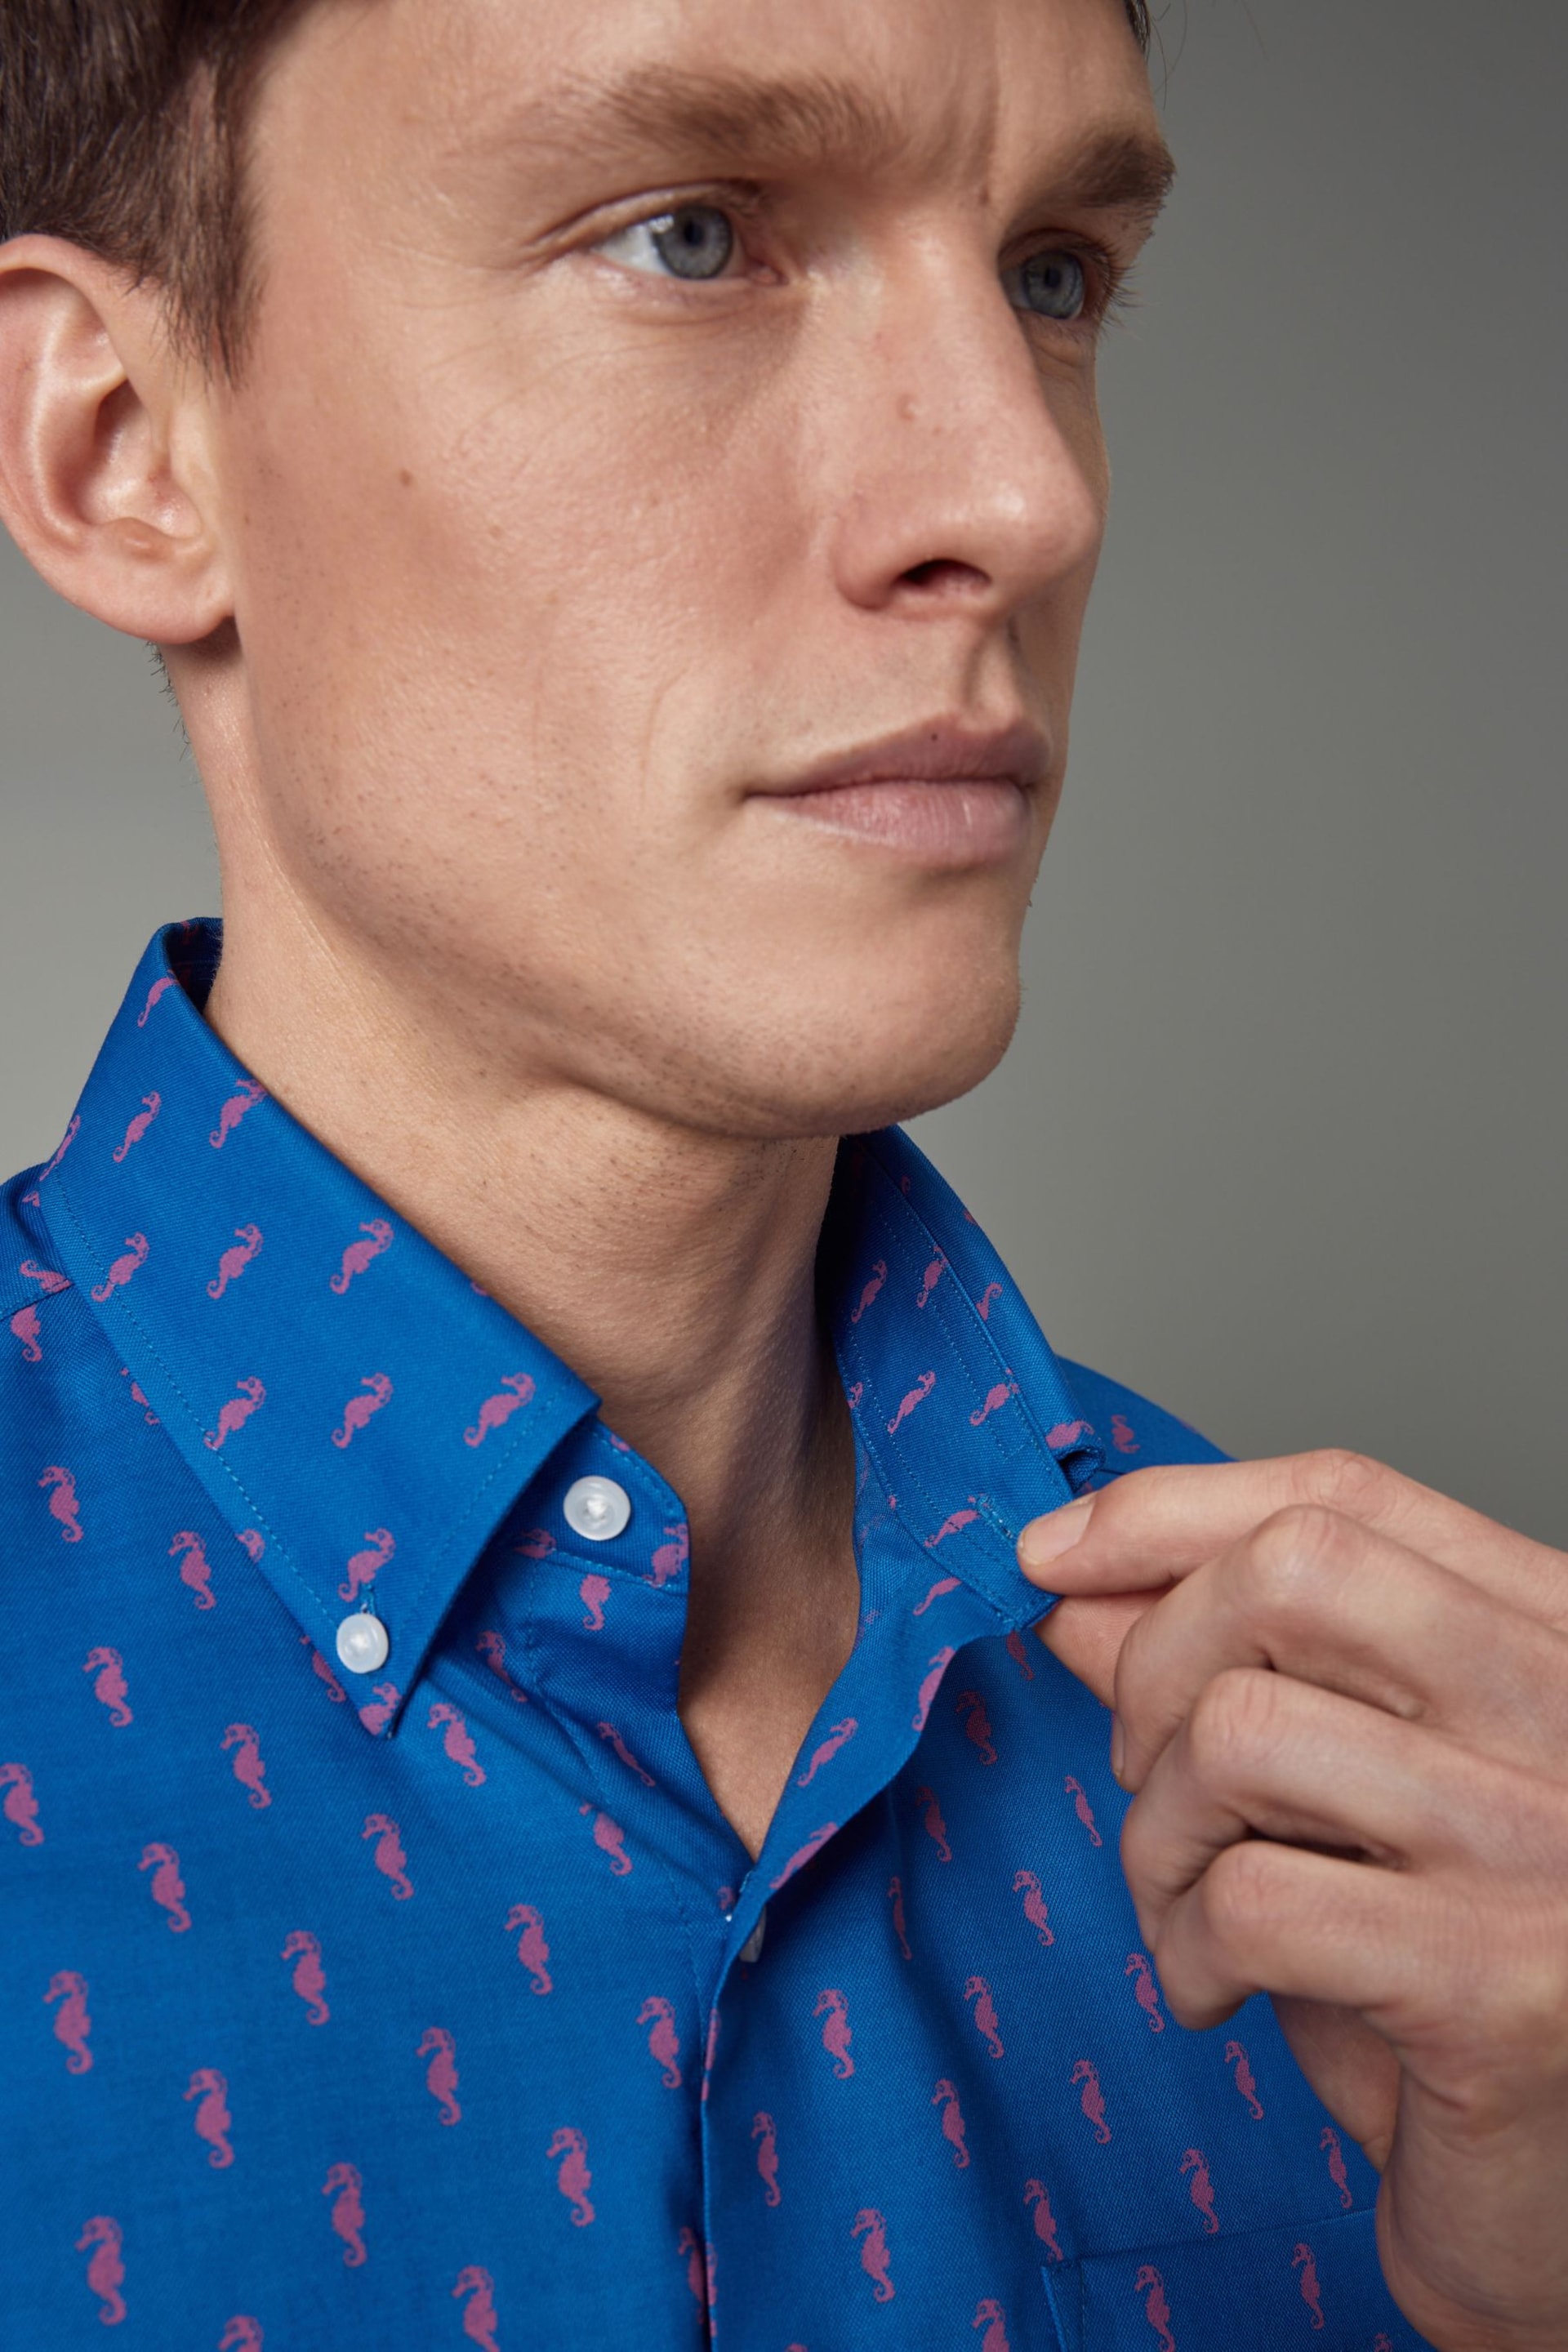 Blue/Pink Seahorse Easy Iron Button Down Short Sleeve Oxford Shirt - Image 5 of 9